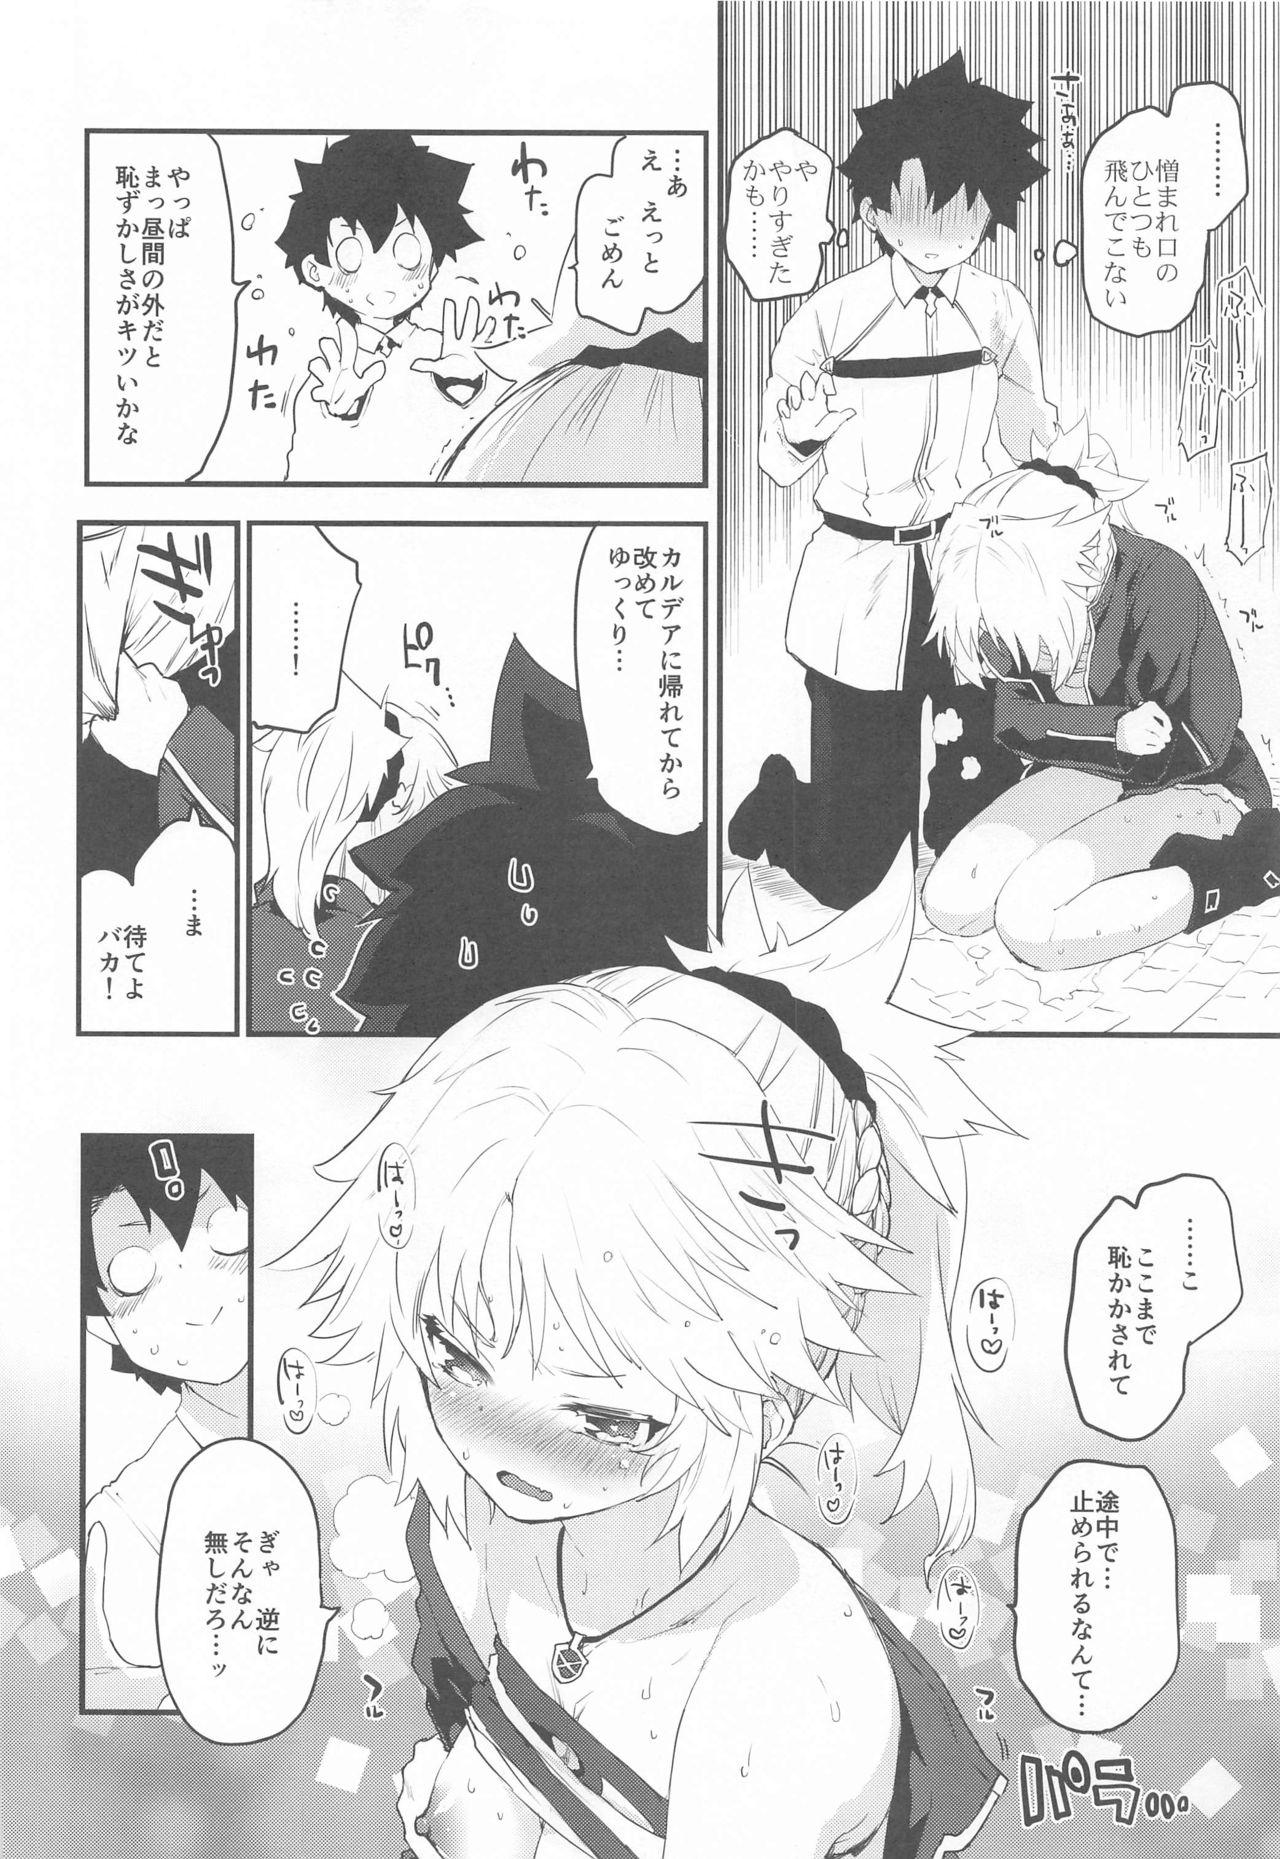 Doublepenetration Memory of Honey Night - Fate grand order Watersports - Page 9